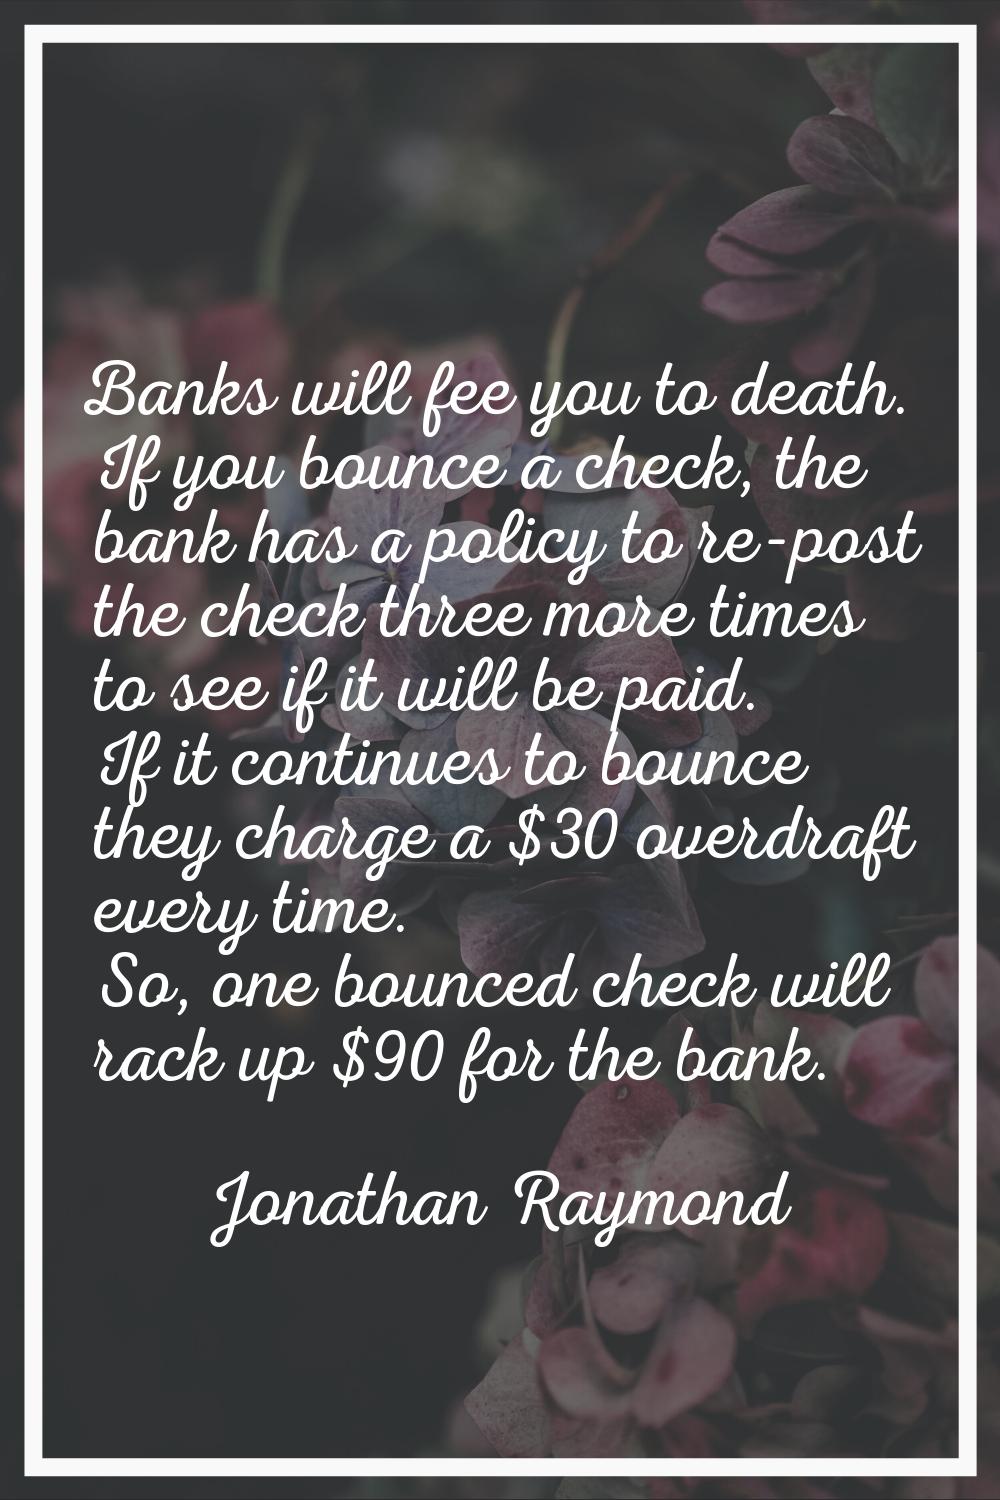 Banks will fee you to death. If you bounce a check, the bank has a policy to re-post the check thre